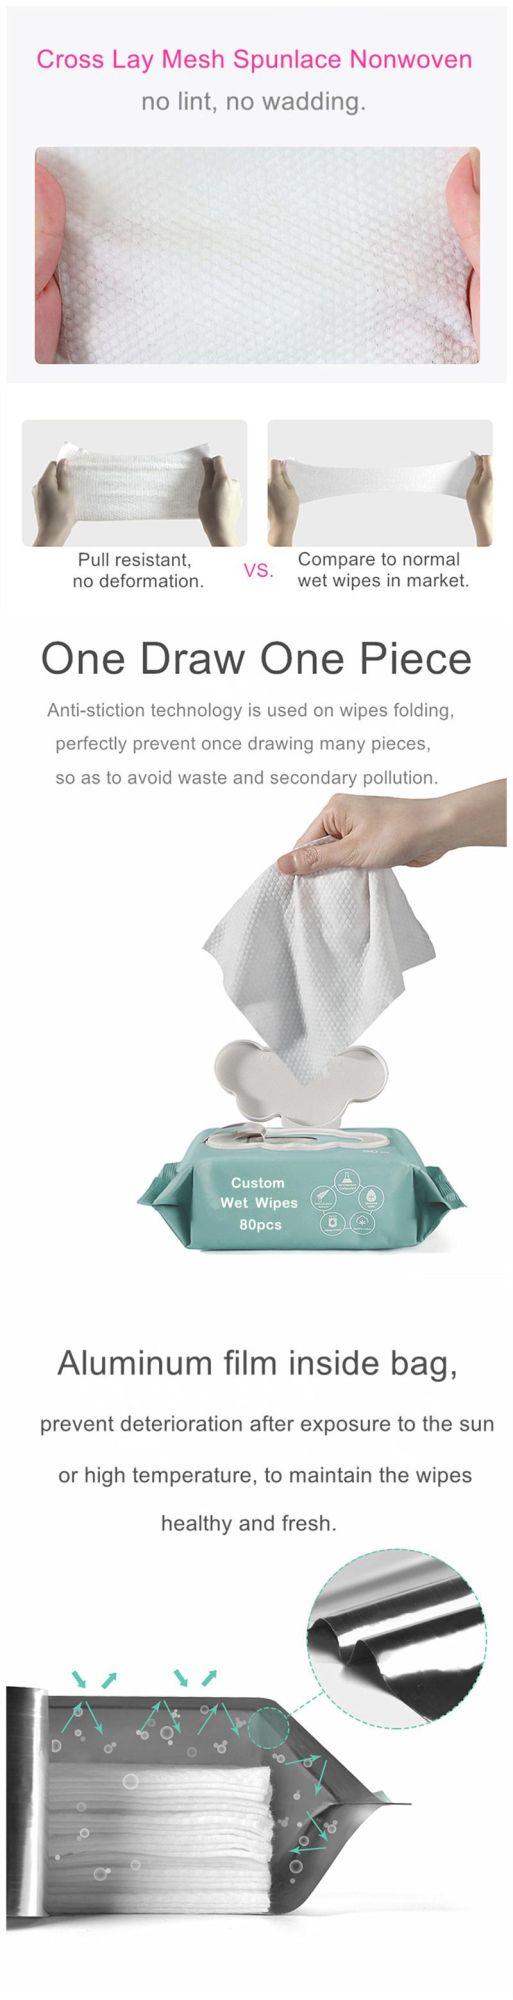 Hot Selling Sterile Non-Alcoholic Wet Wipes for Adults and Children Without Pigment